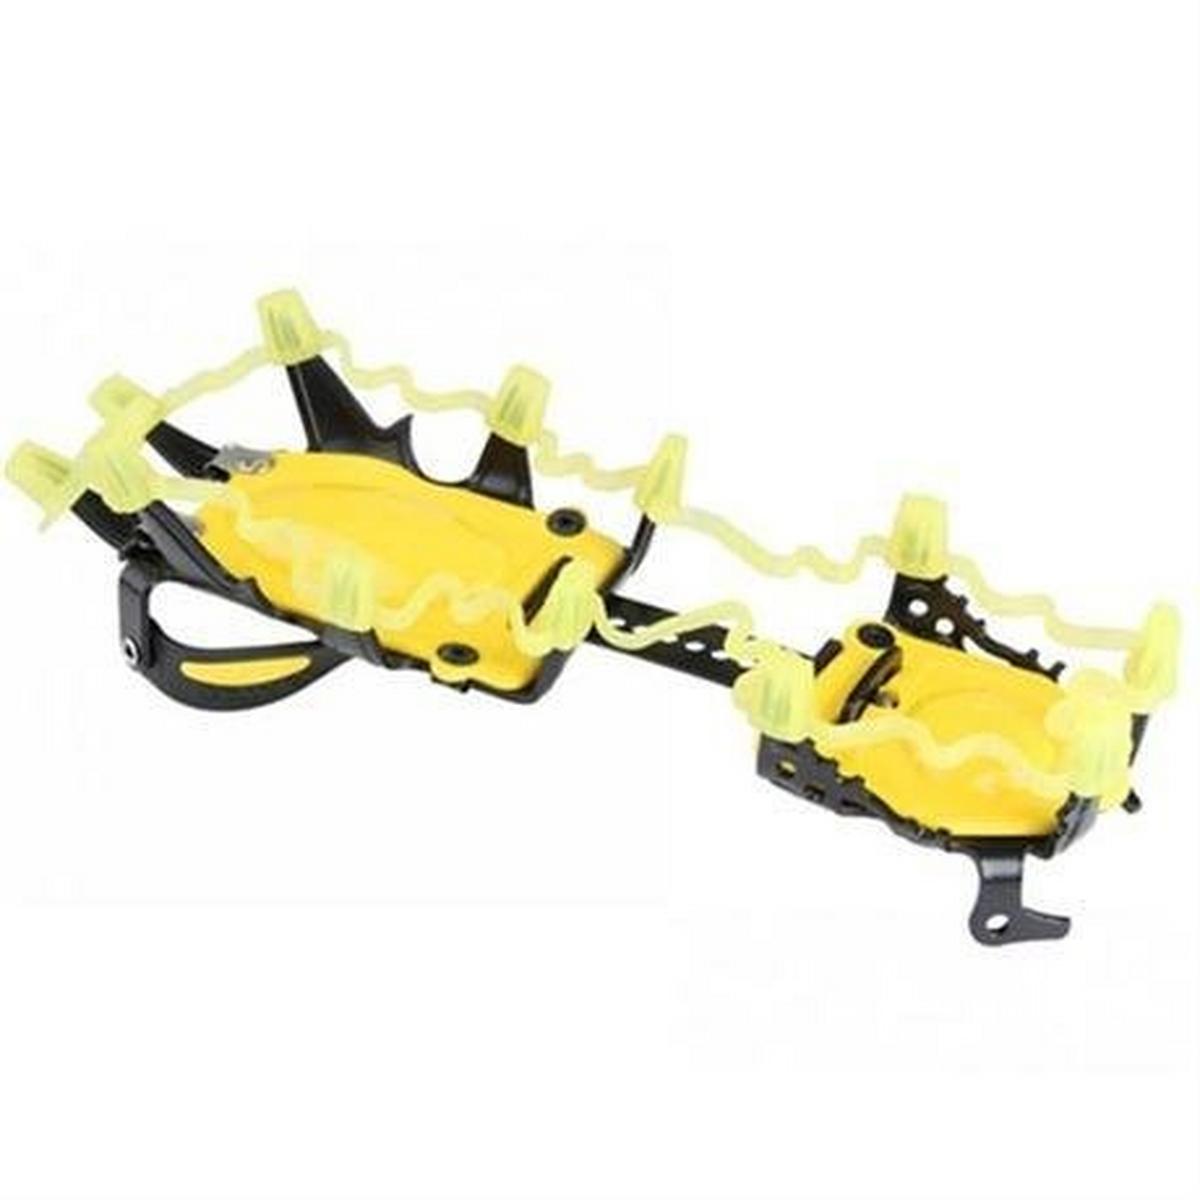 Grivel Crampons Spare/Accessory: Crampon Crown Protectors